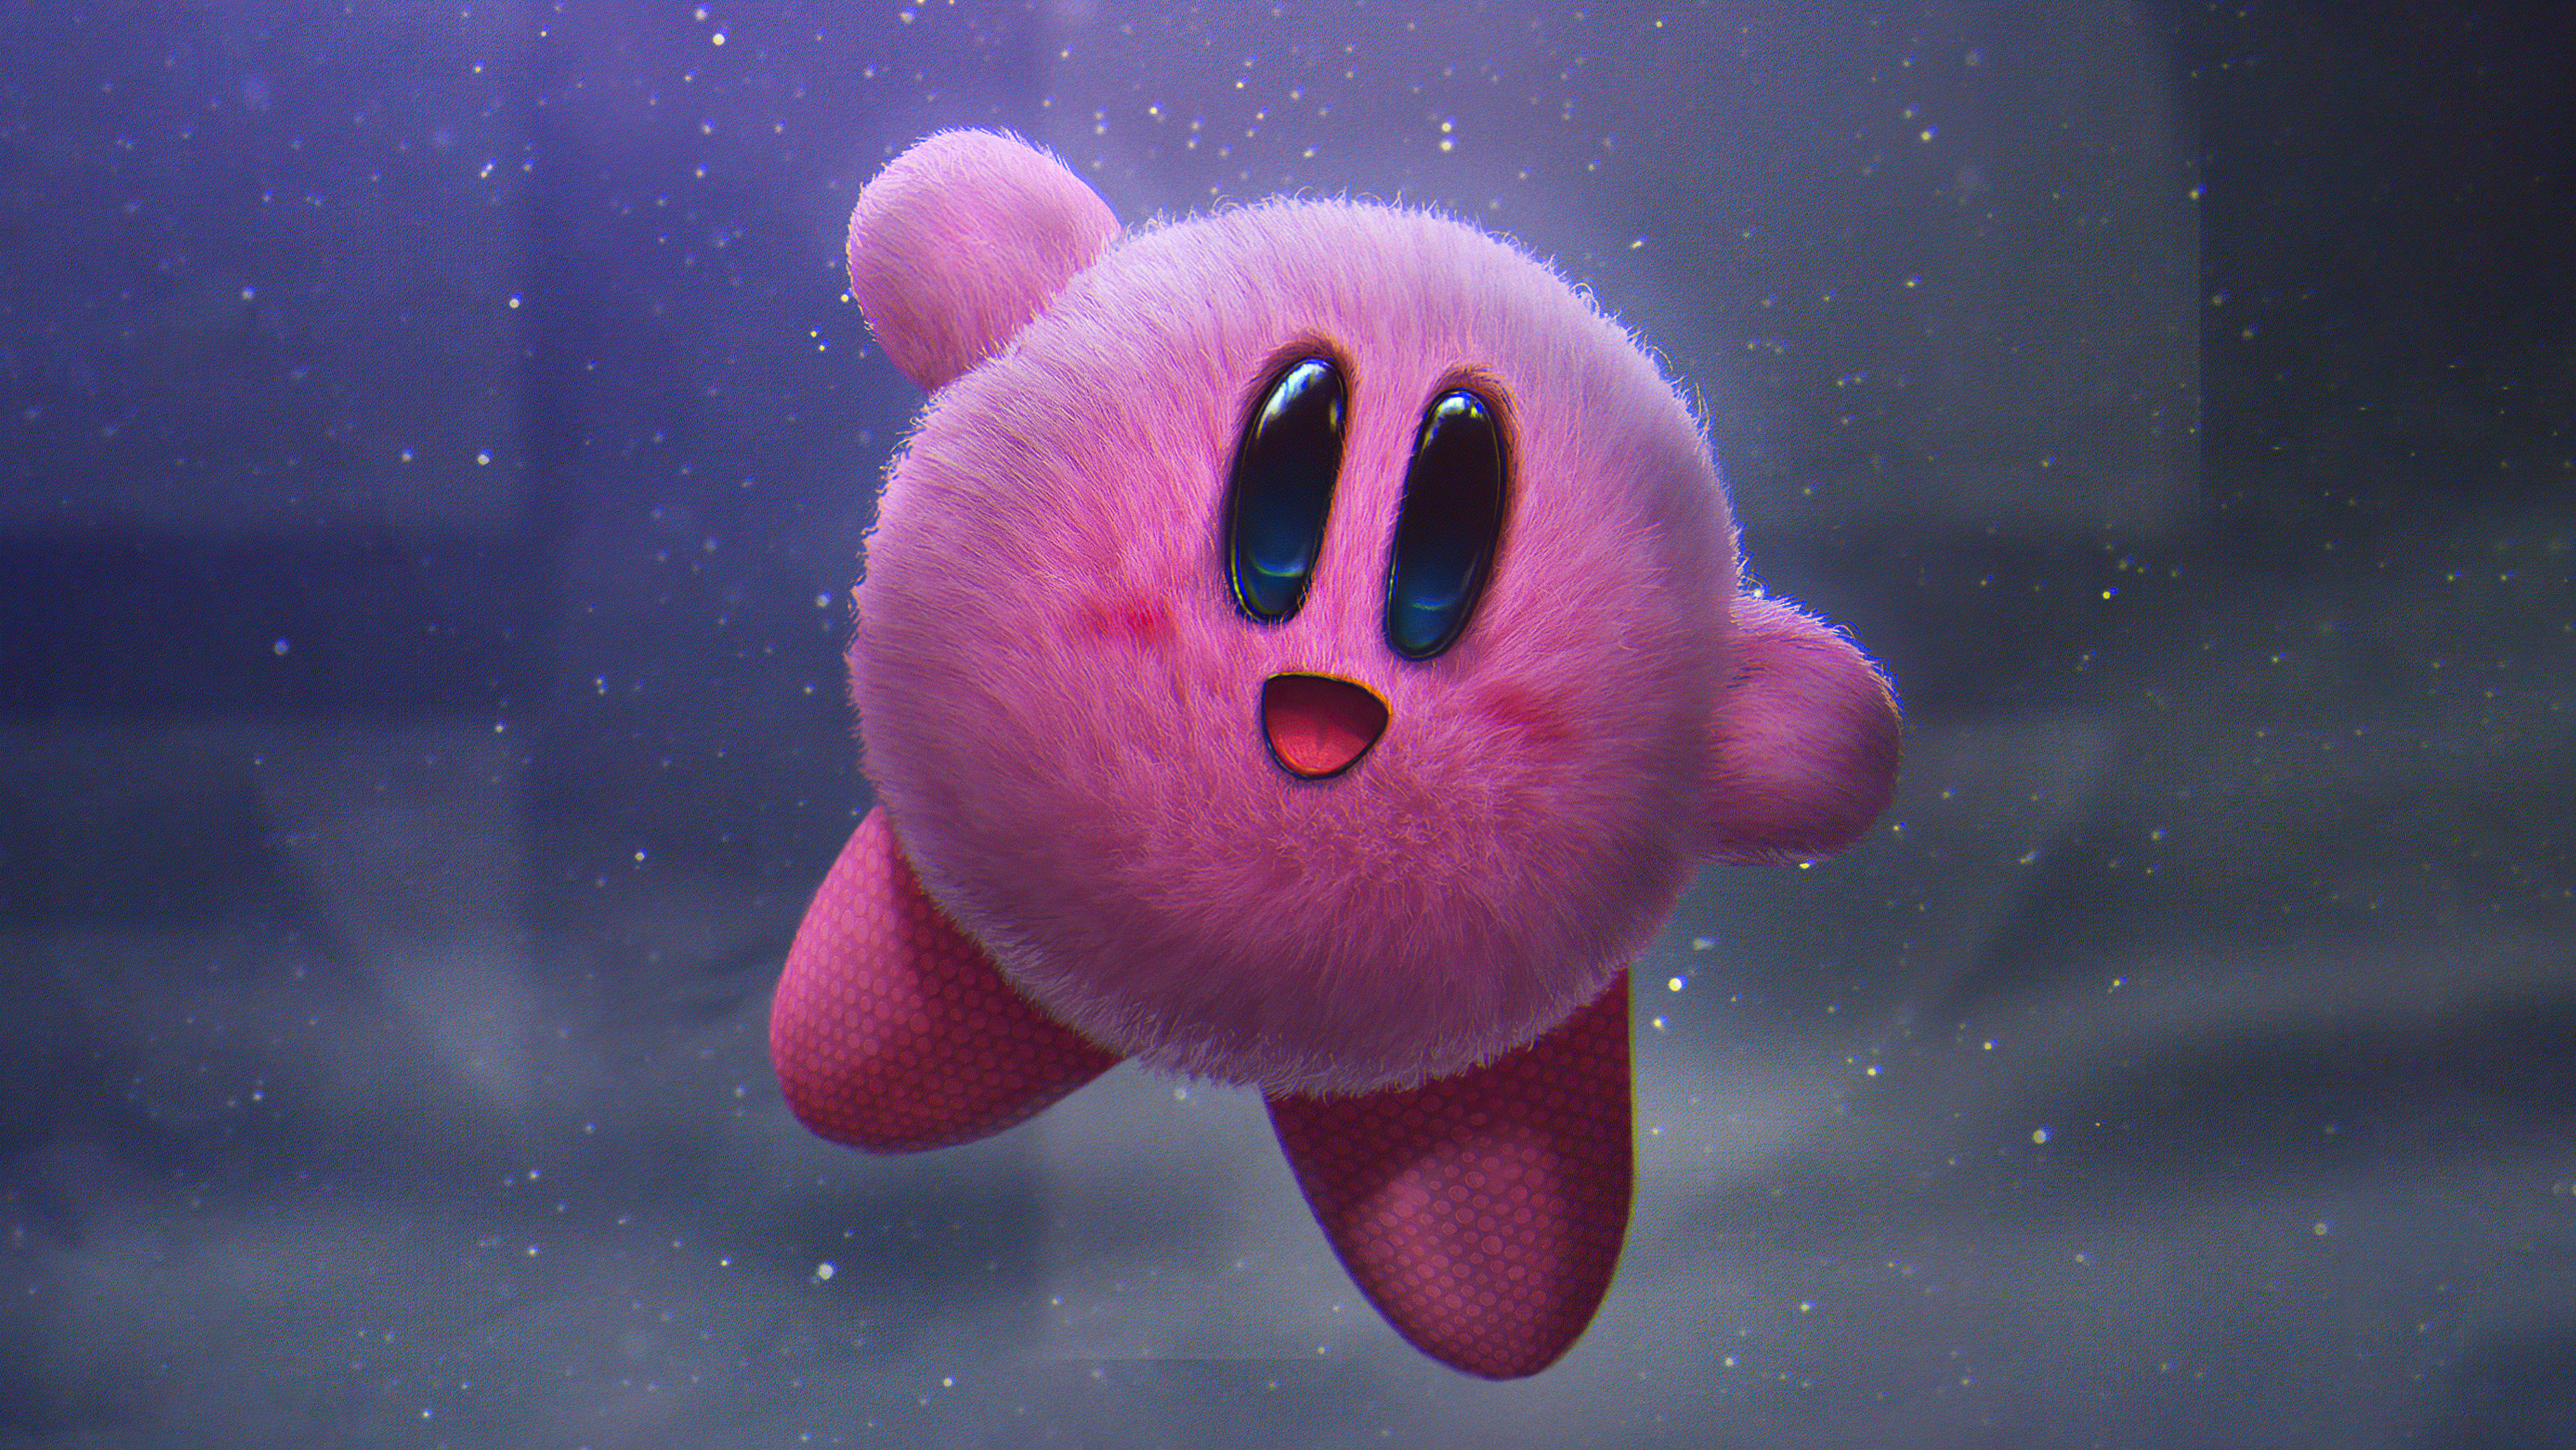 Kirby Informer on X: Here's the official Kirby phone wallpaper